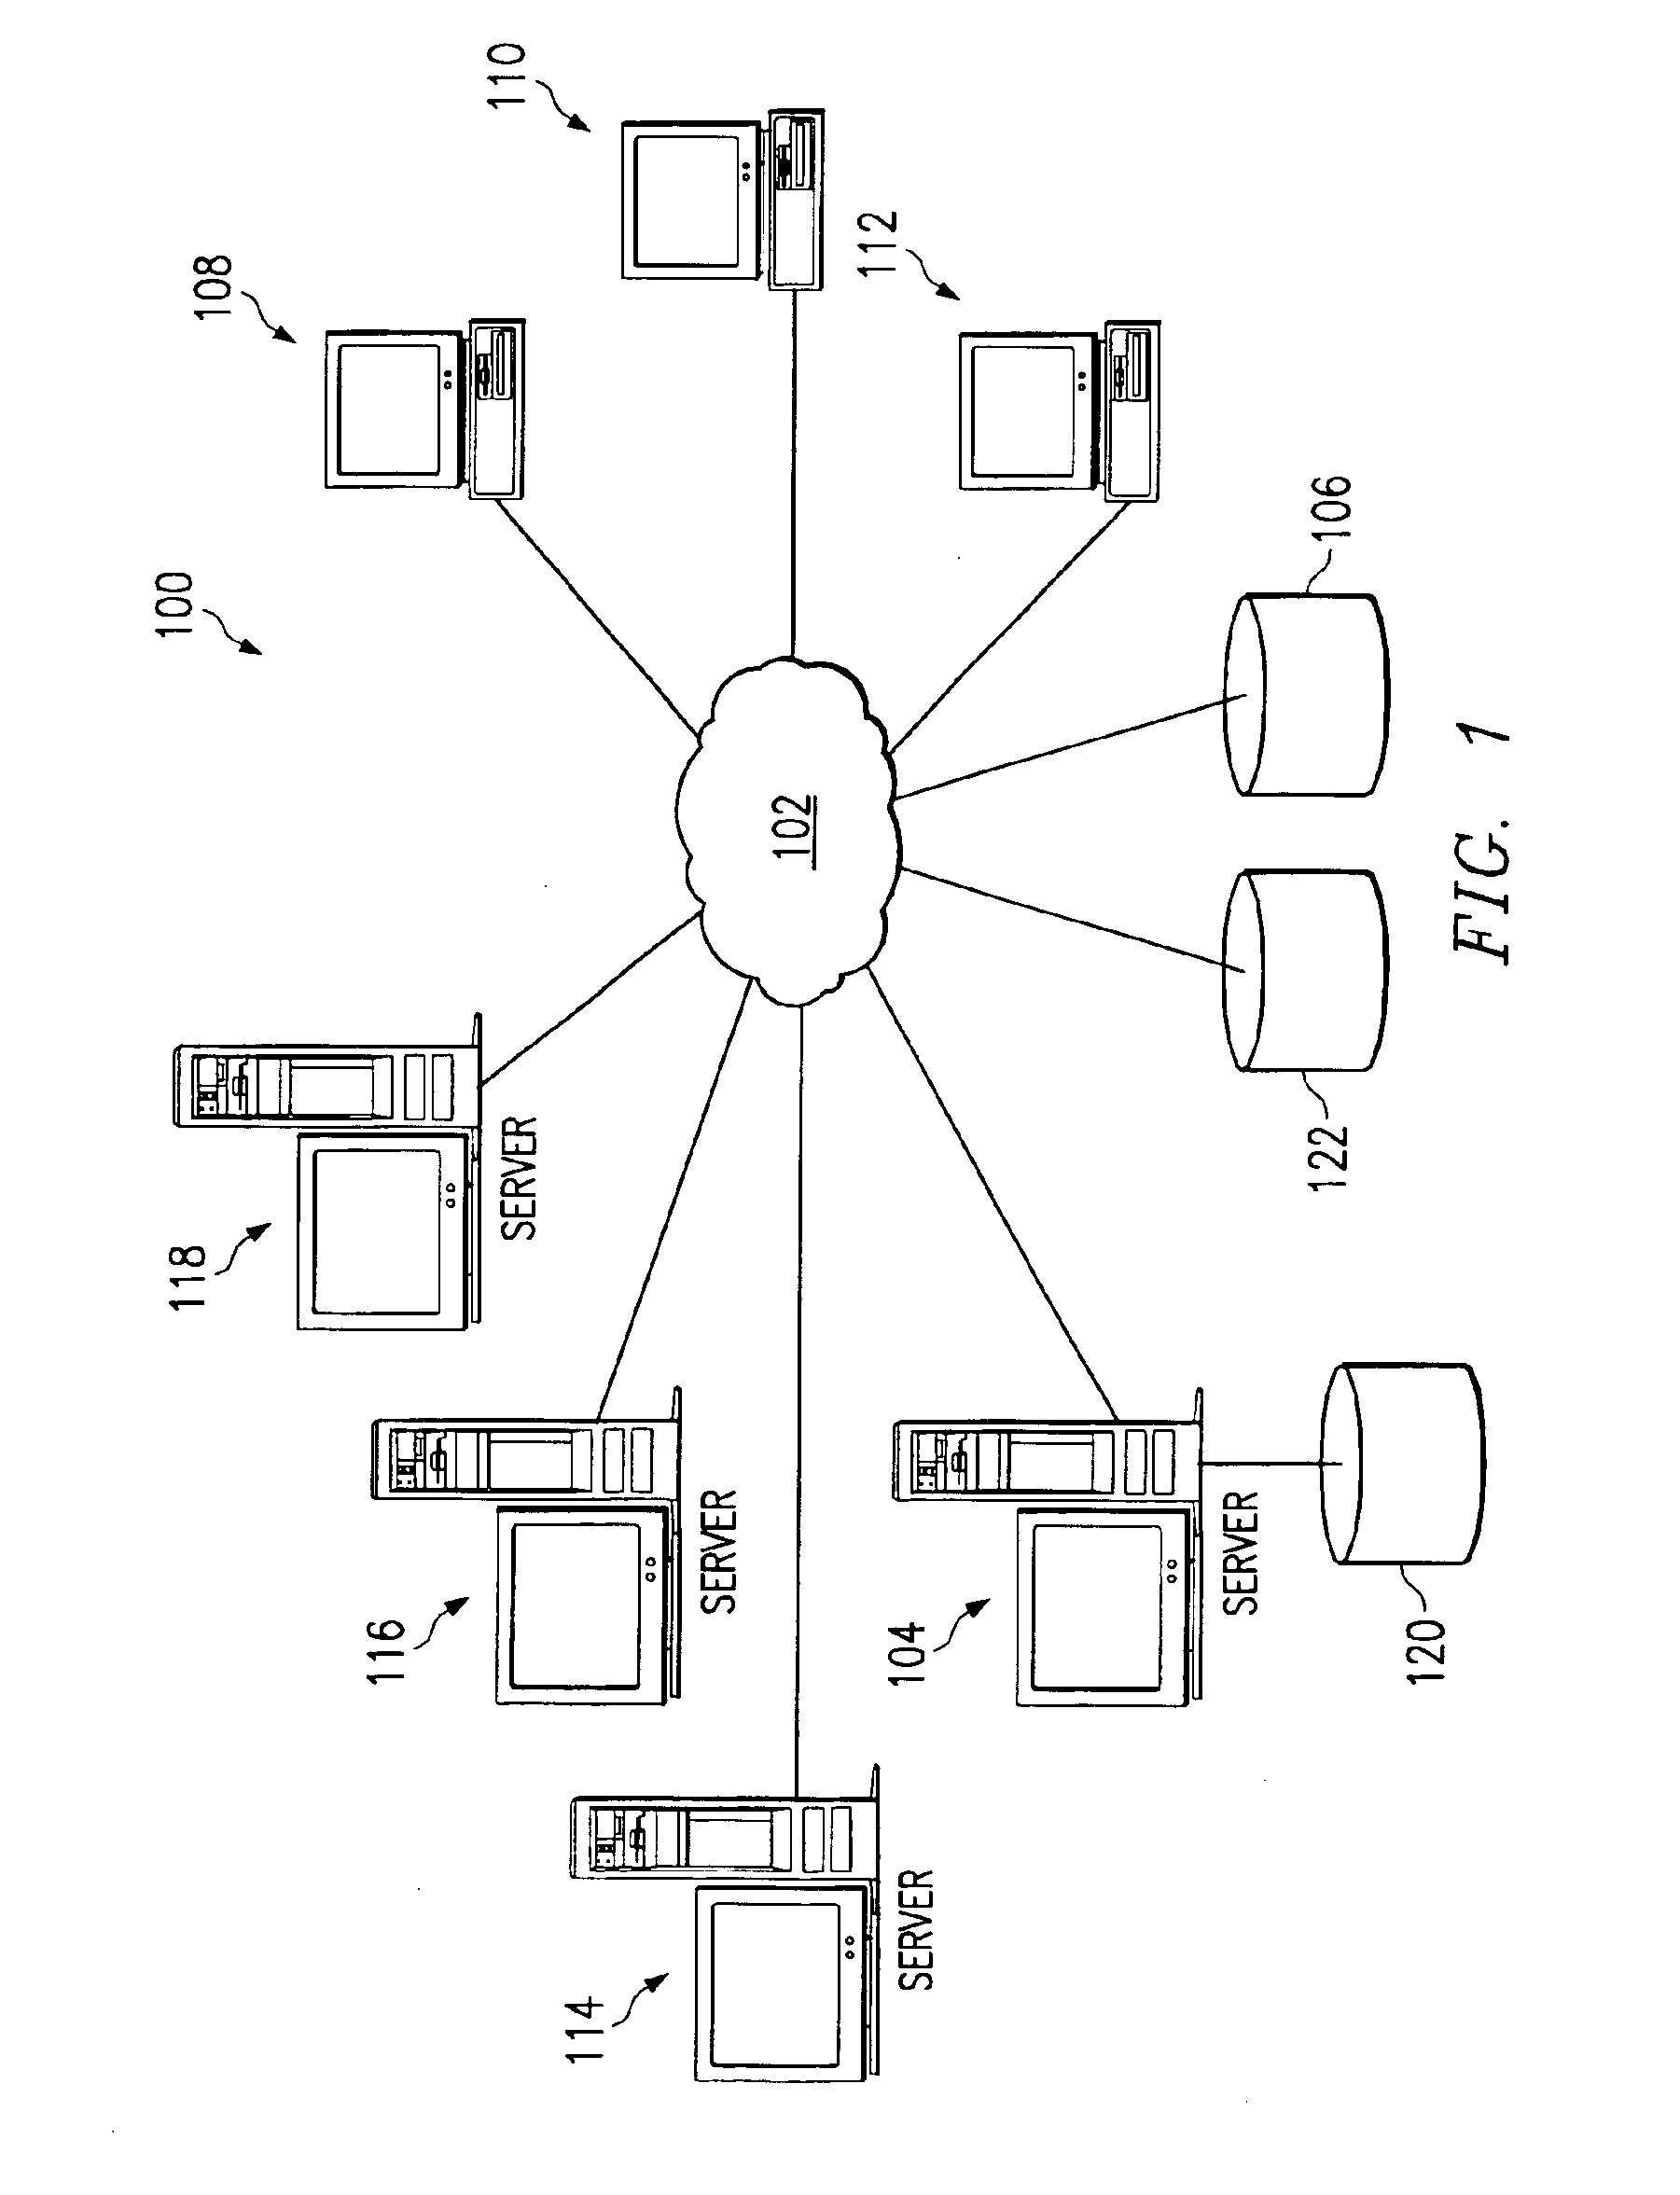 Method and an apparatus to extend the logic volume manager model to allow device management plug-ins